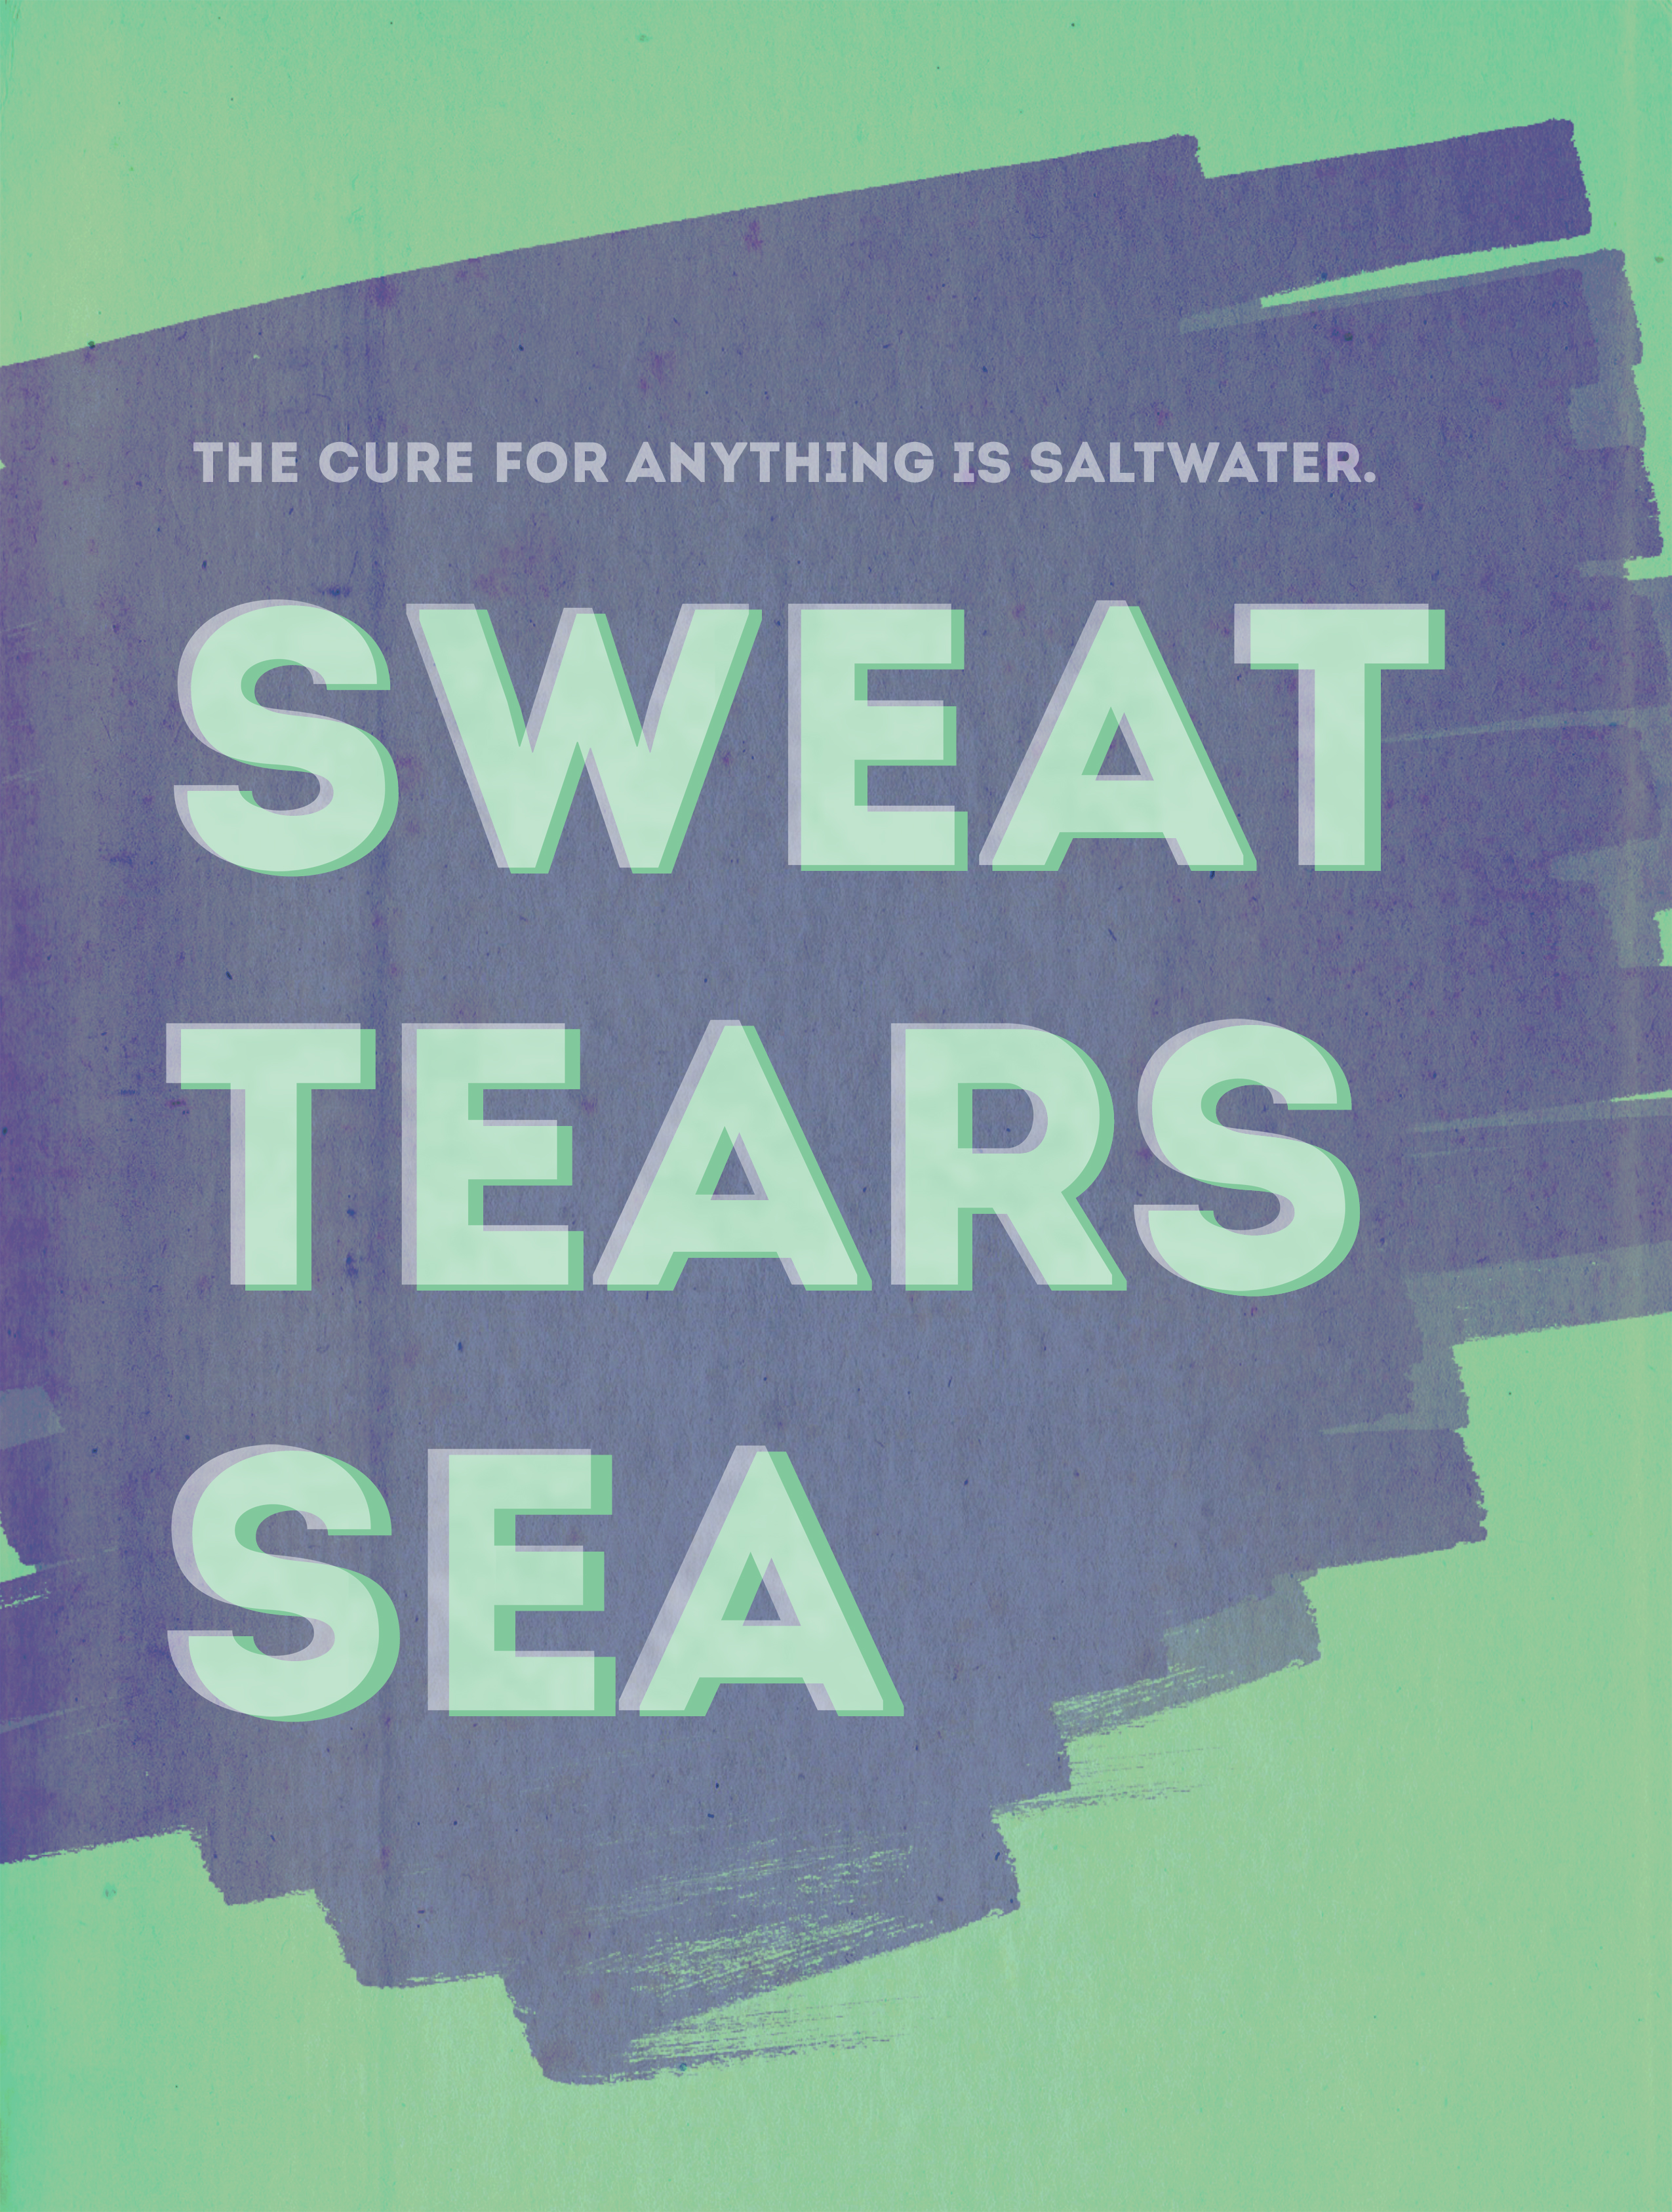 Free Sweat Tears Sea Printable (The Cure for Anything is Saltwater)